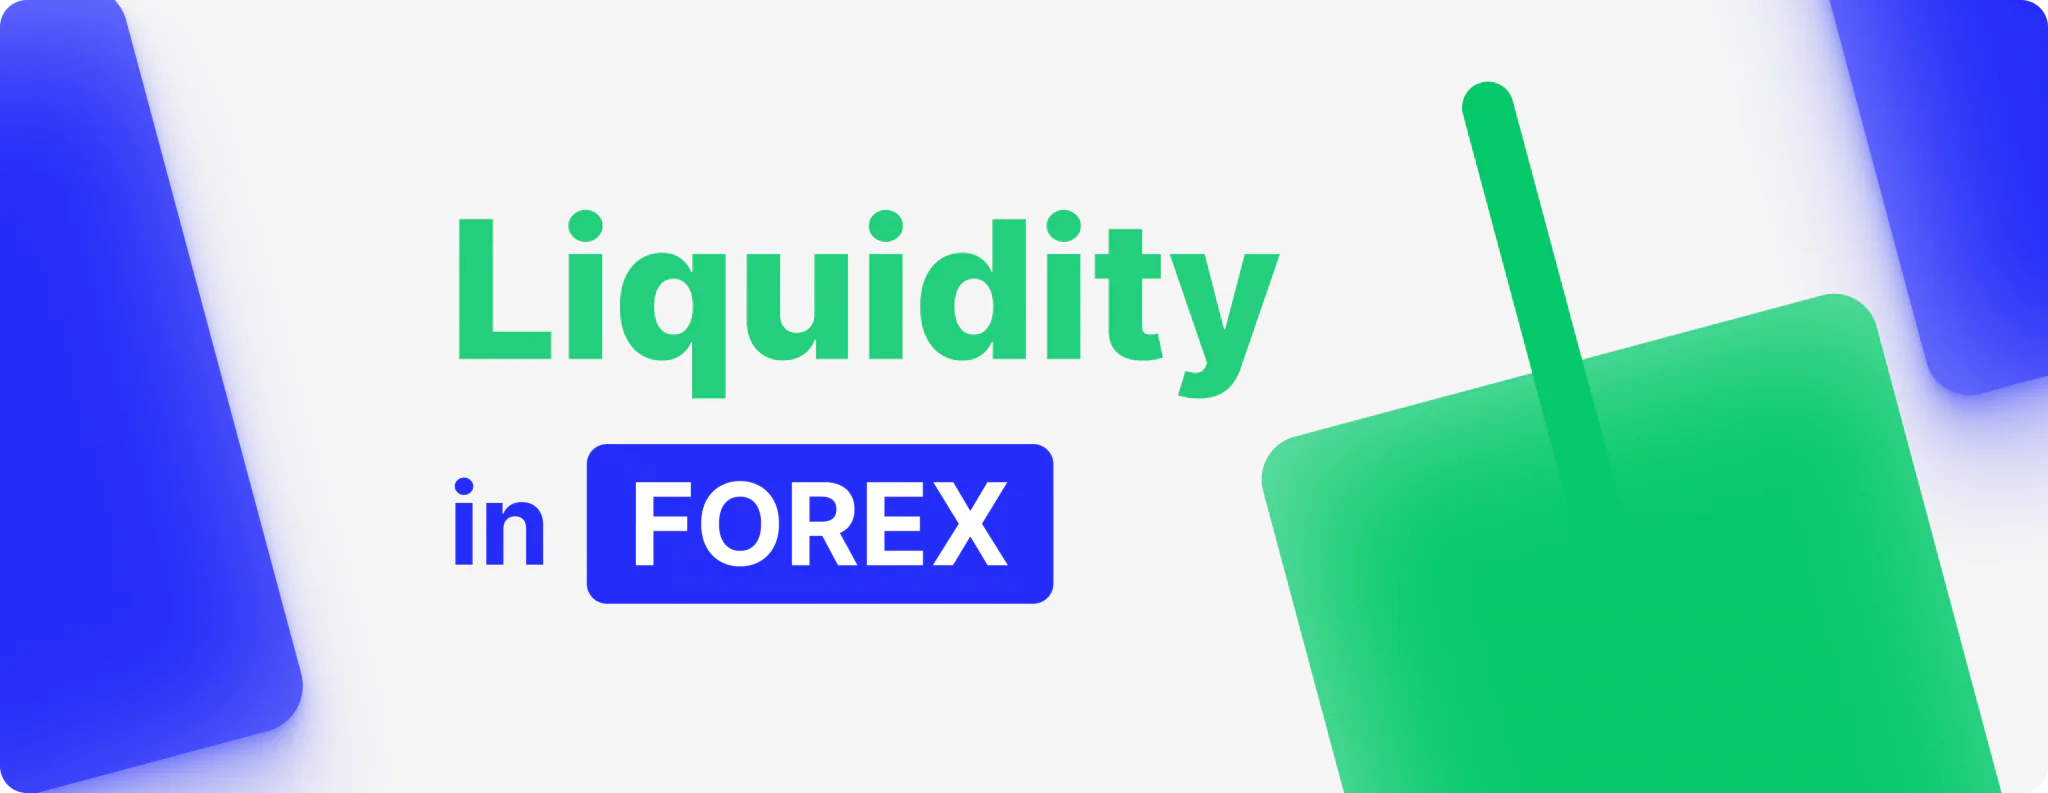 What is Liquidity in Forex